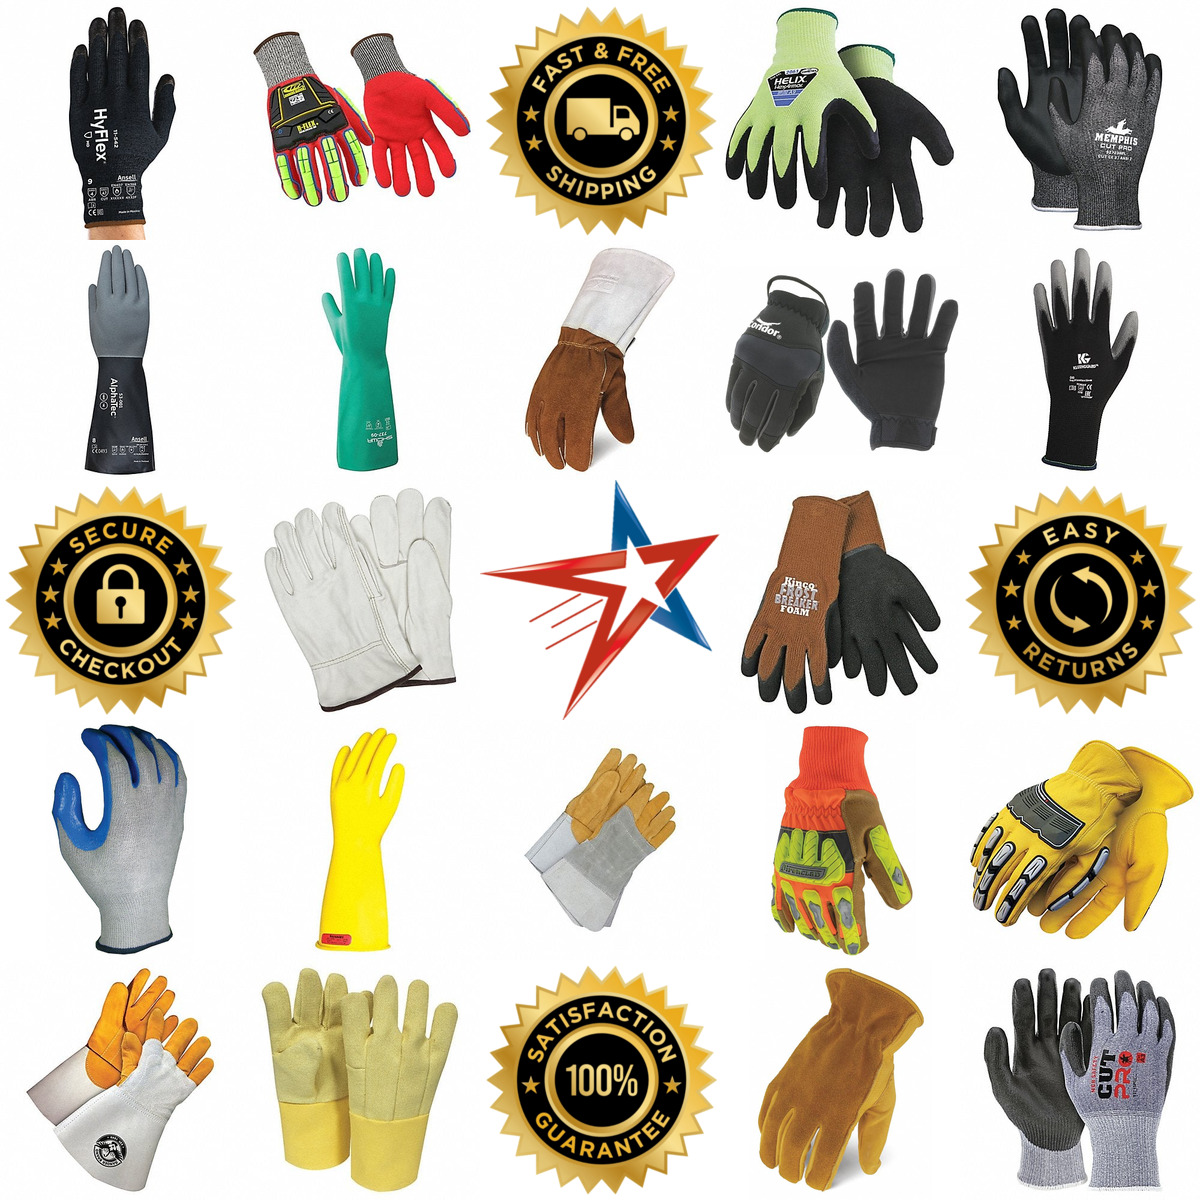 A selection of Gloves and Hand Protection products on GoVets